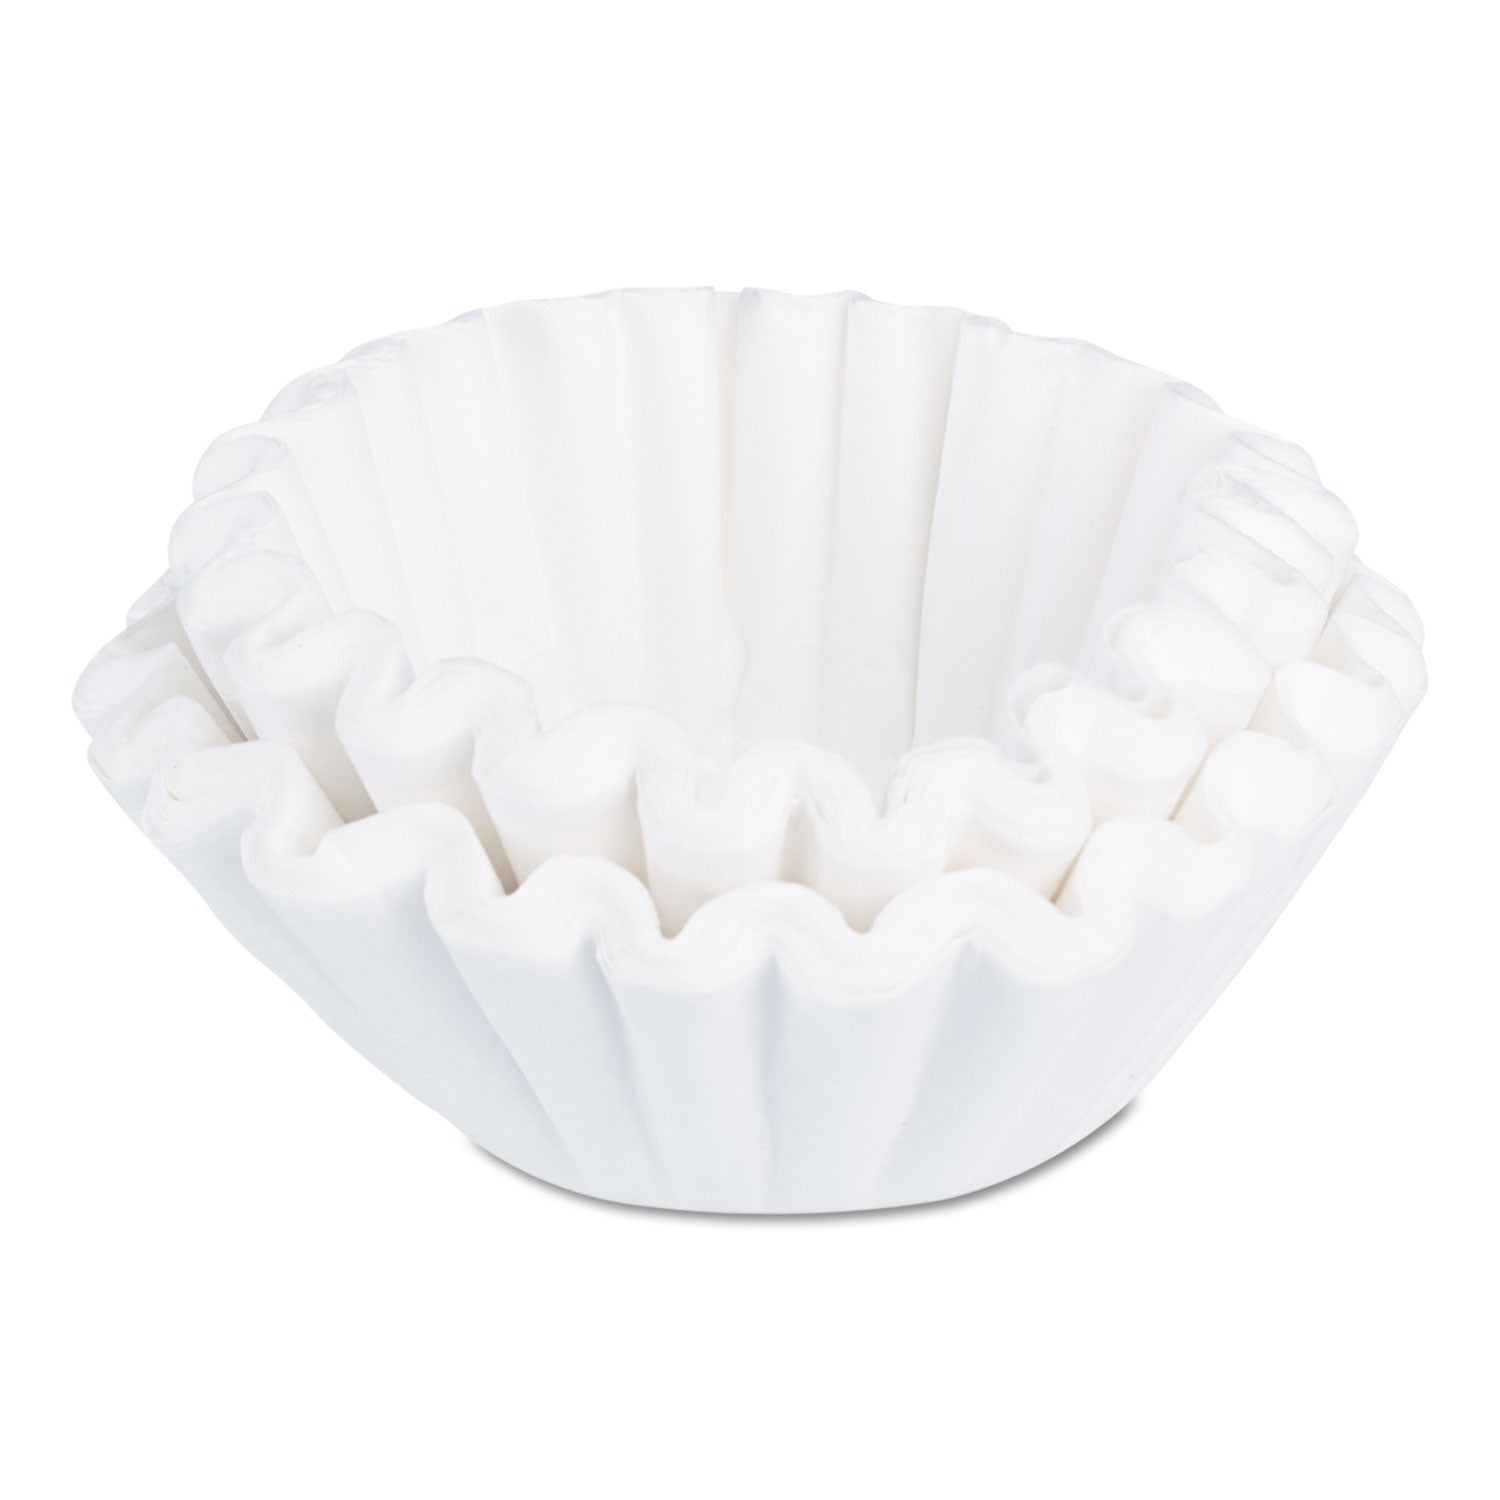 Commercial Coffee Filters, 6 gal Urn Style, Flat Bottom, 25/Cluster, 10 Clusters/Pack - 